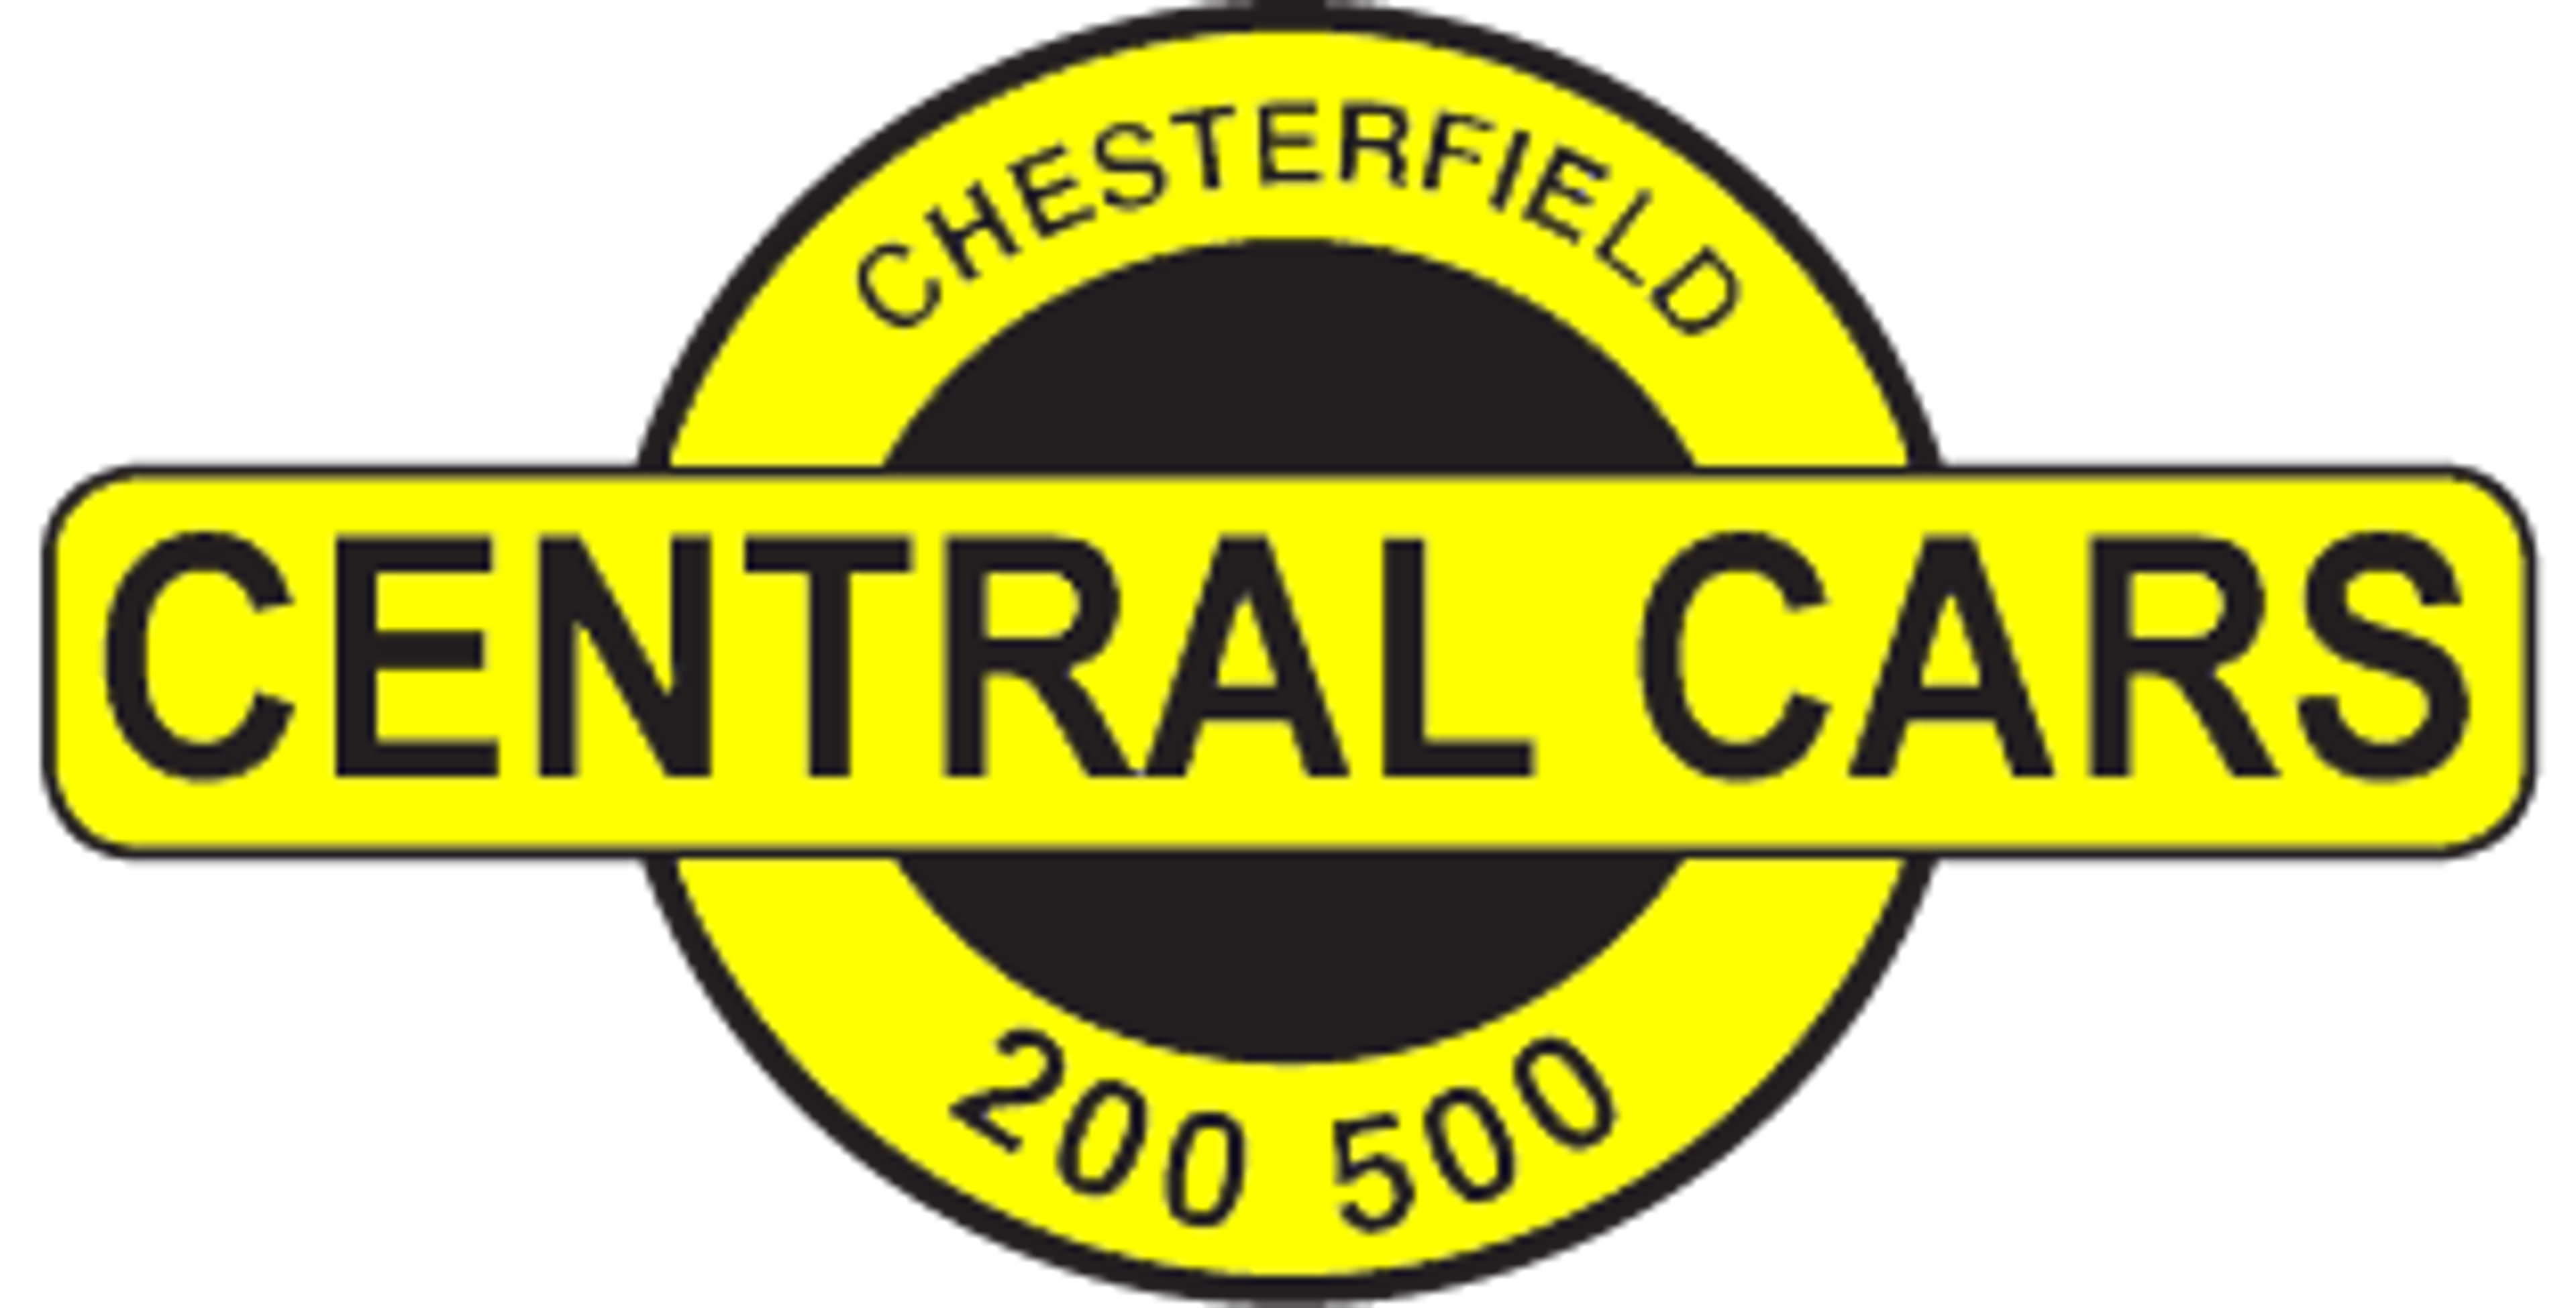 Recent project we worked on for Central Cars Chesterfield